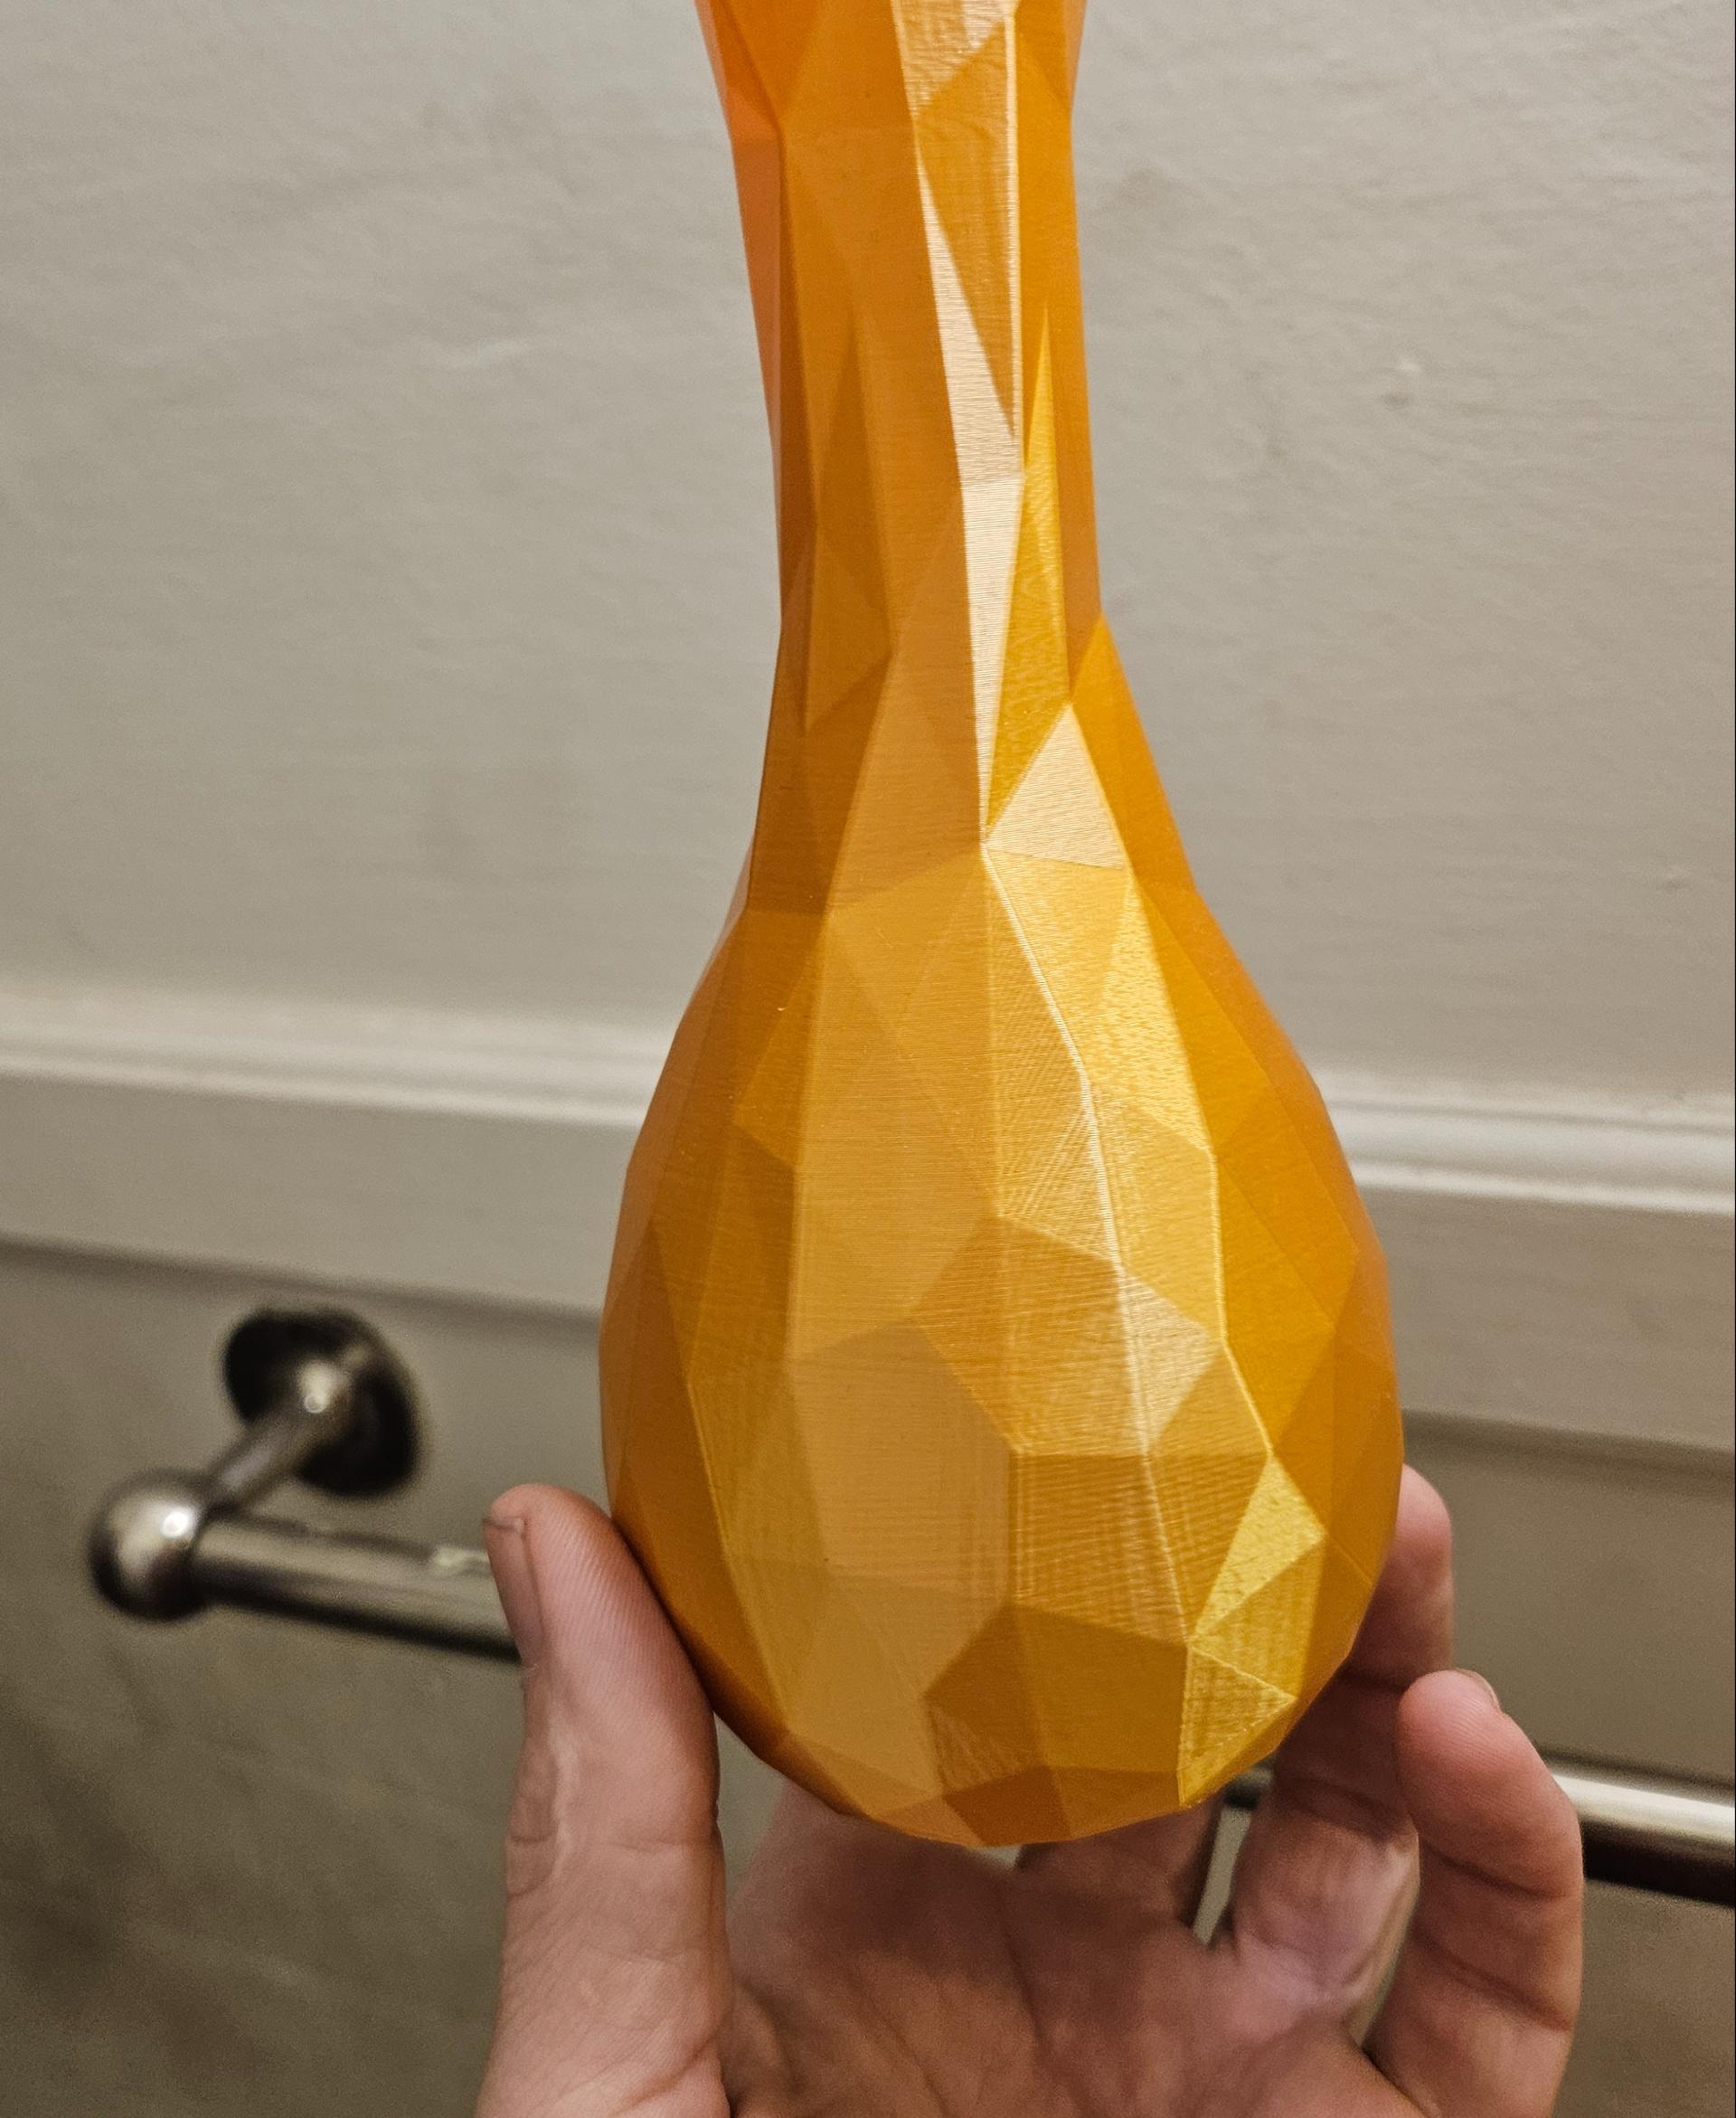 low poly flask - Larger low poly vase printed in gold silk PLA by Mika 3D printed on CR10 - 3d model